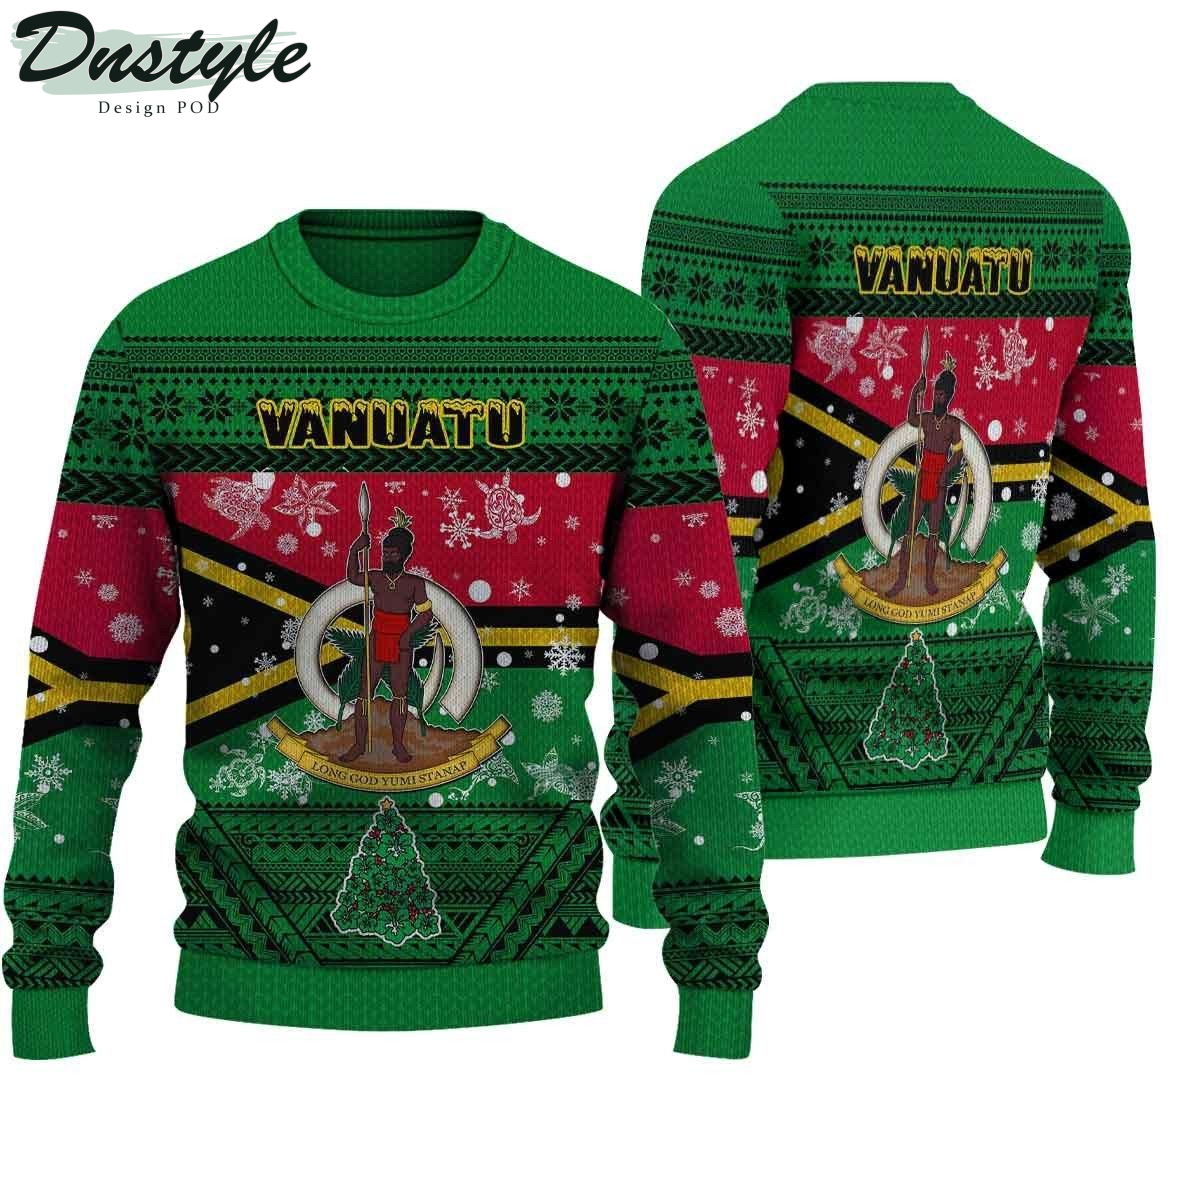 Pohnpei ugly christmas sweater